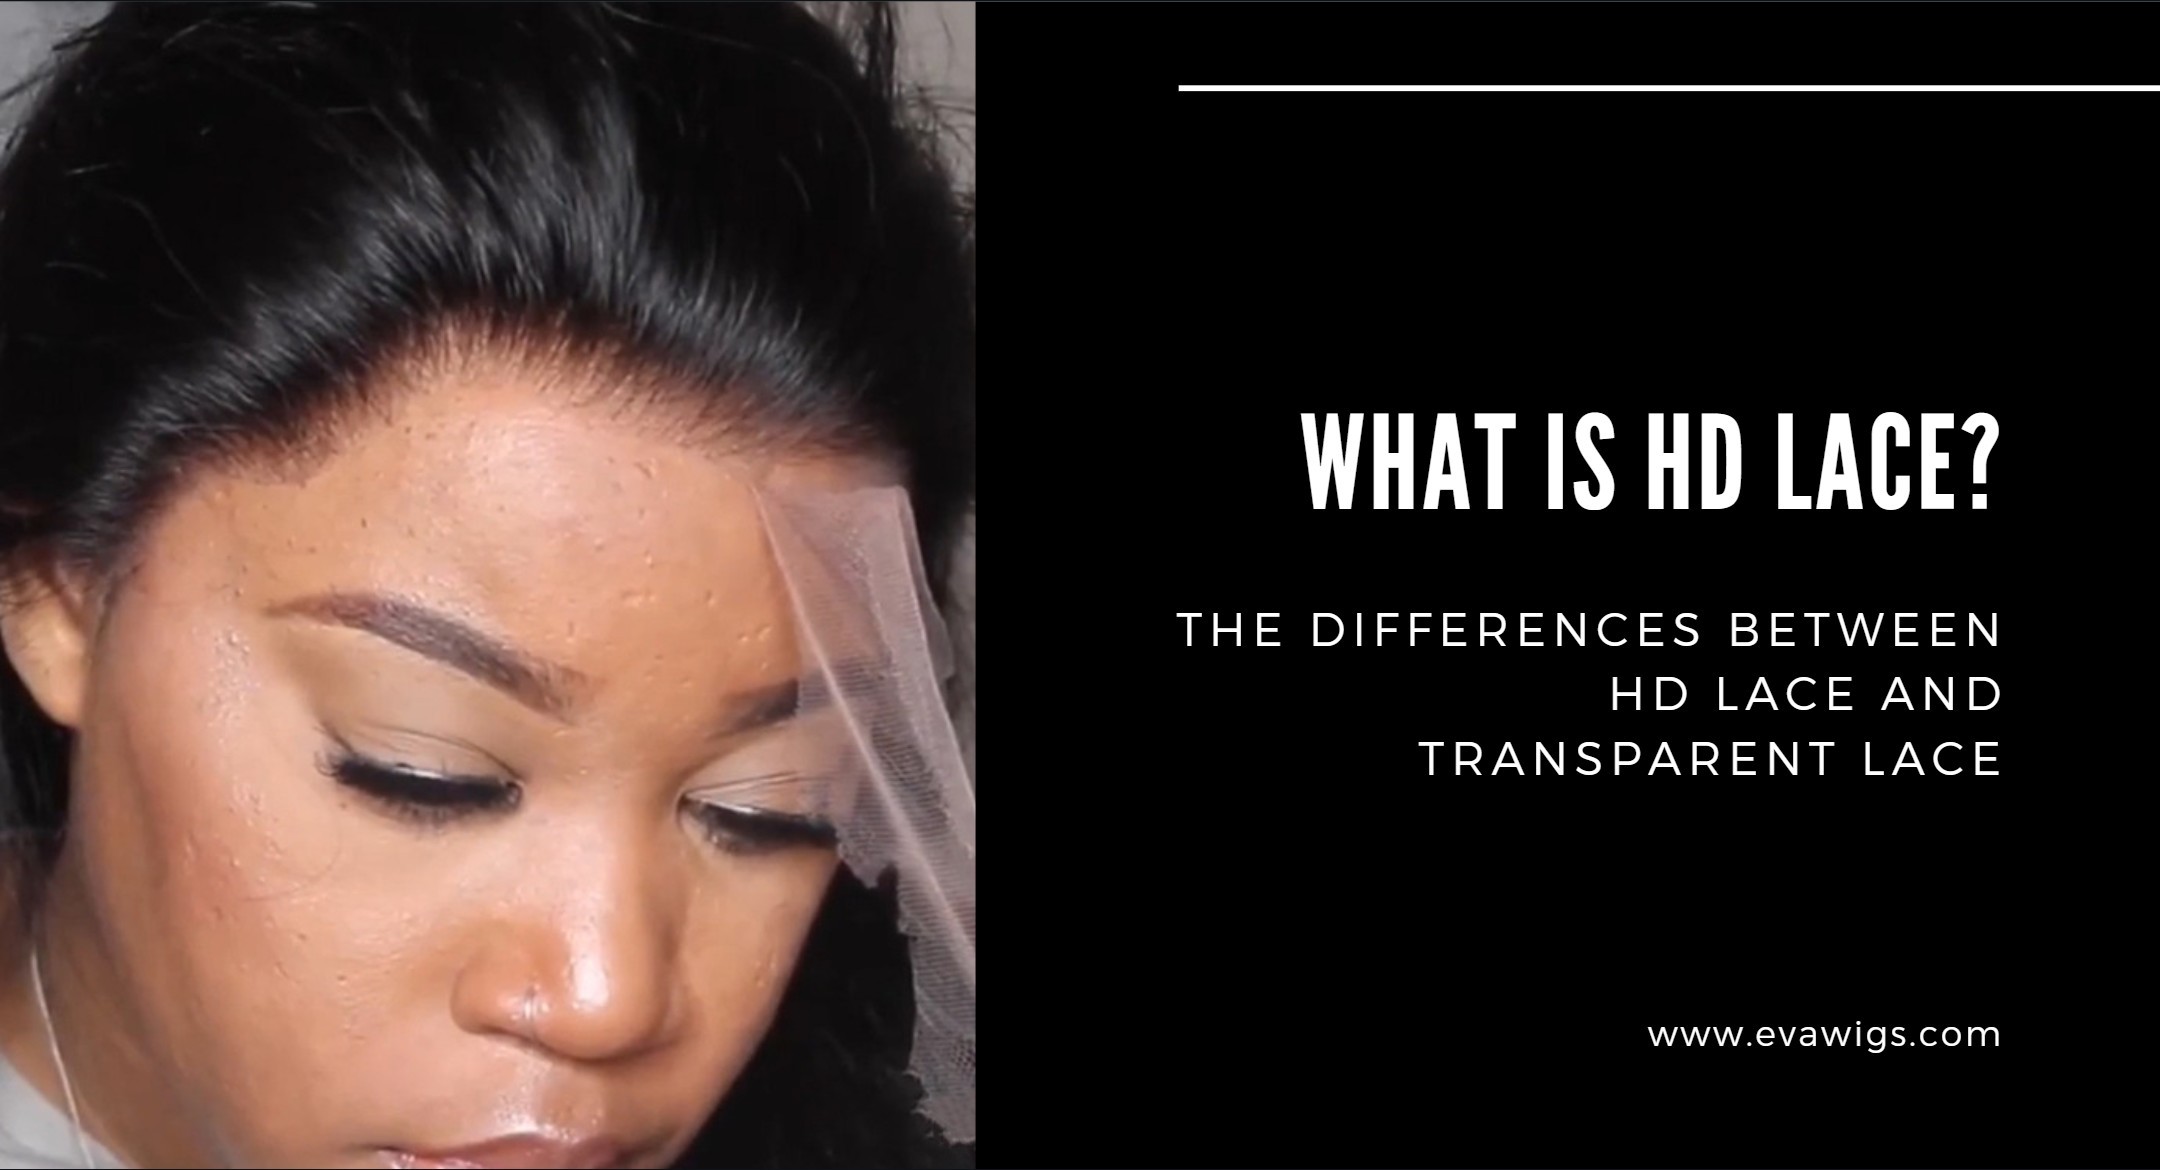 What is HD Lace? What is Transparent Lace? What's the Difference between Normal Lace and HD Lace? An